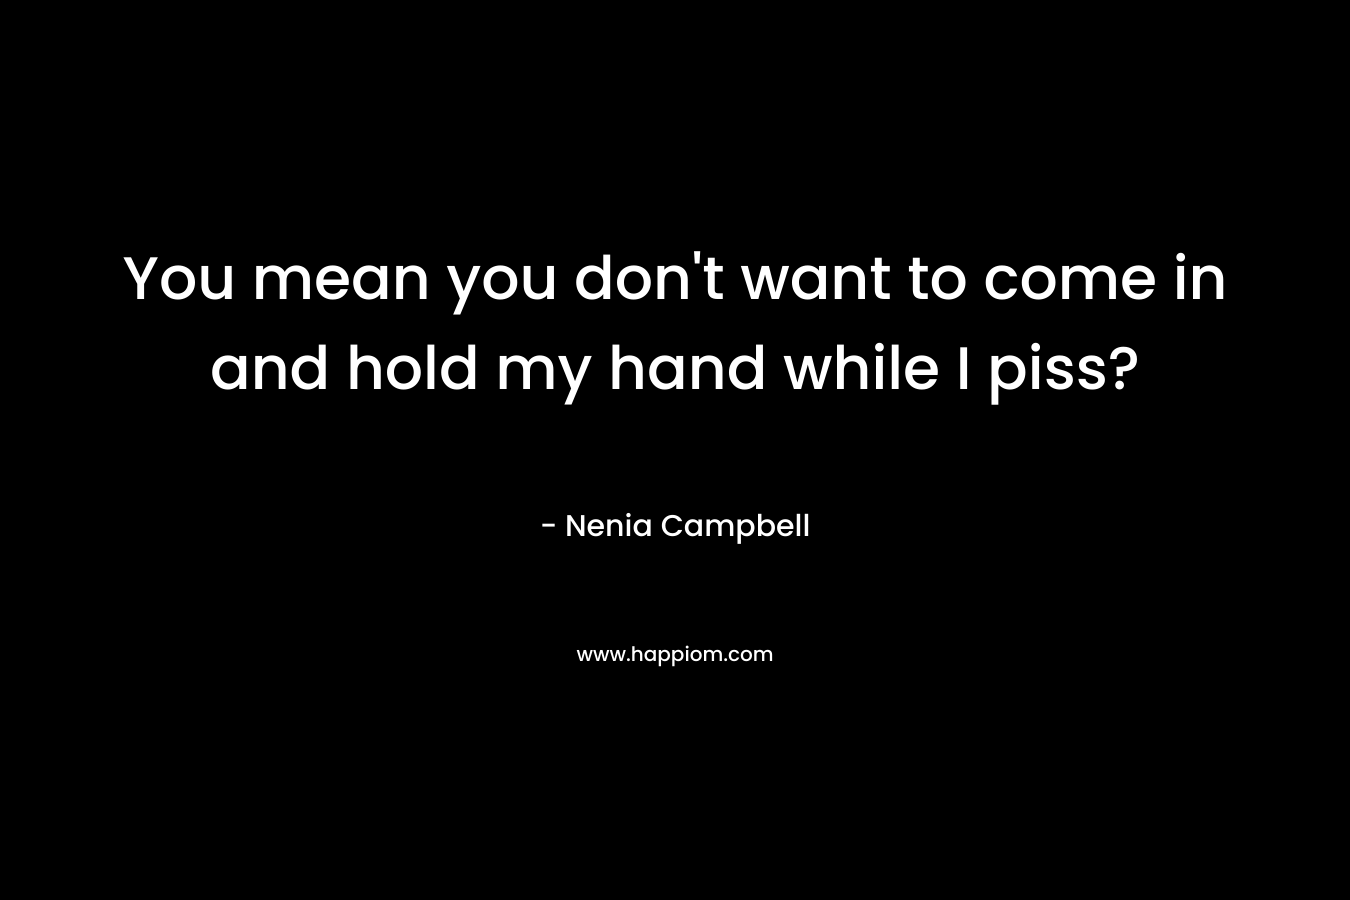 You mean you don’t want to come in and hold my hand while I piss? – Nenia Campbell